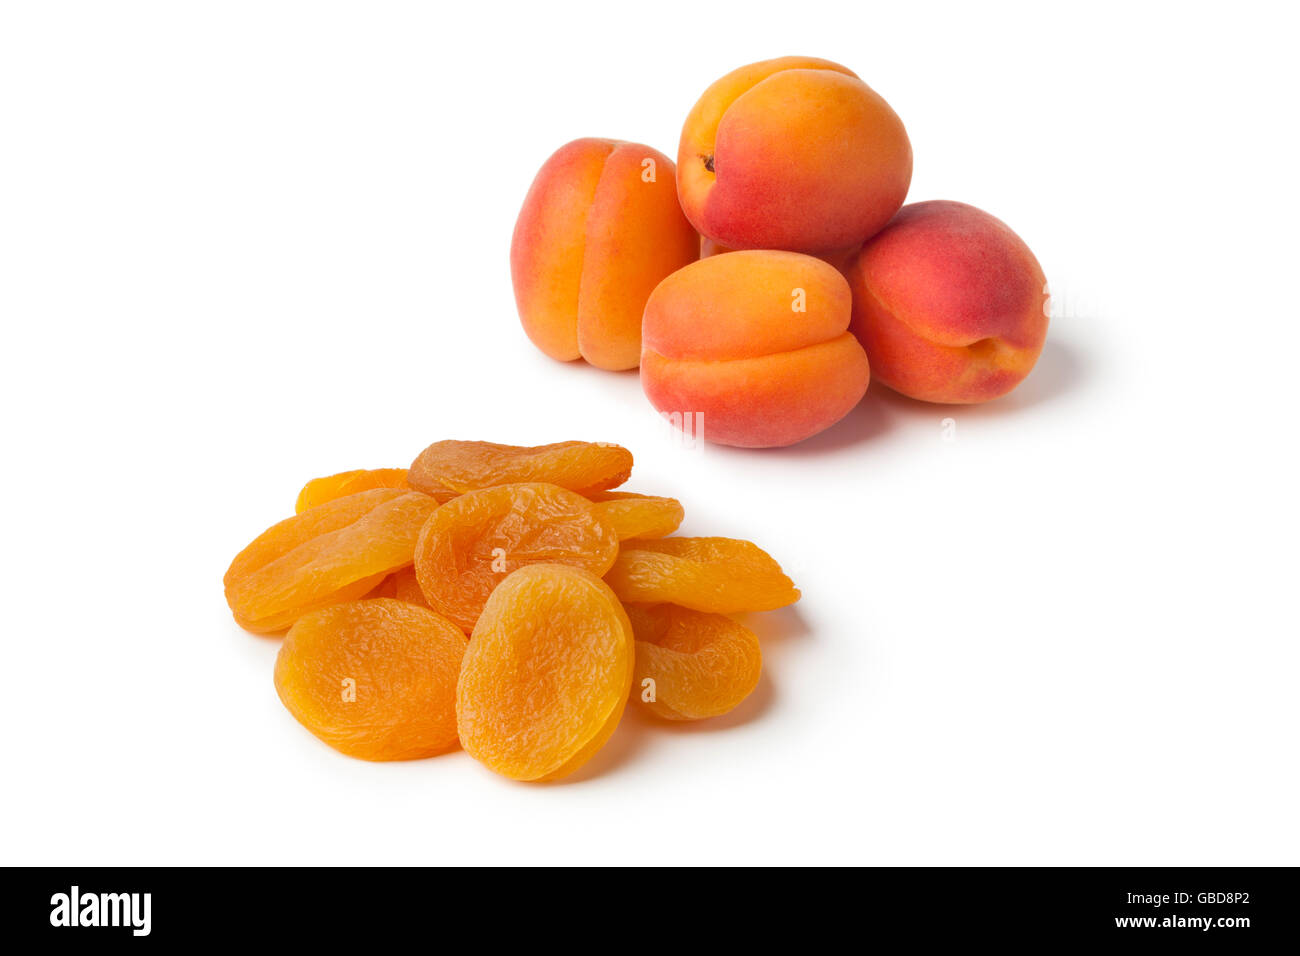 Heap of healthy nutritious fresh and dried apricot fruit on white background Stock Photo